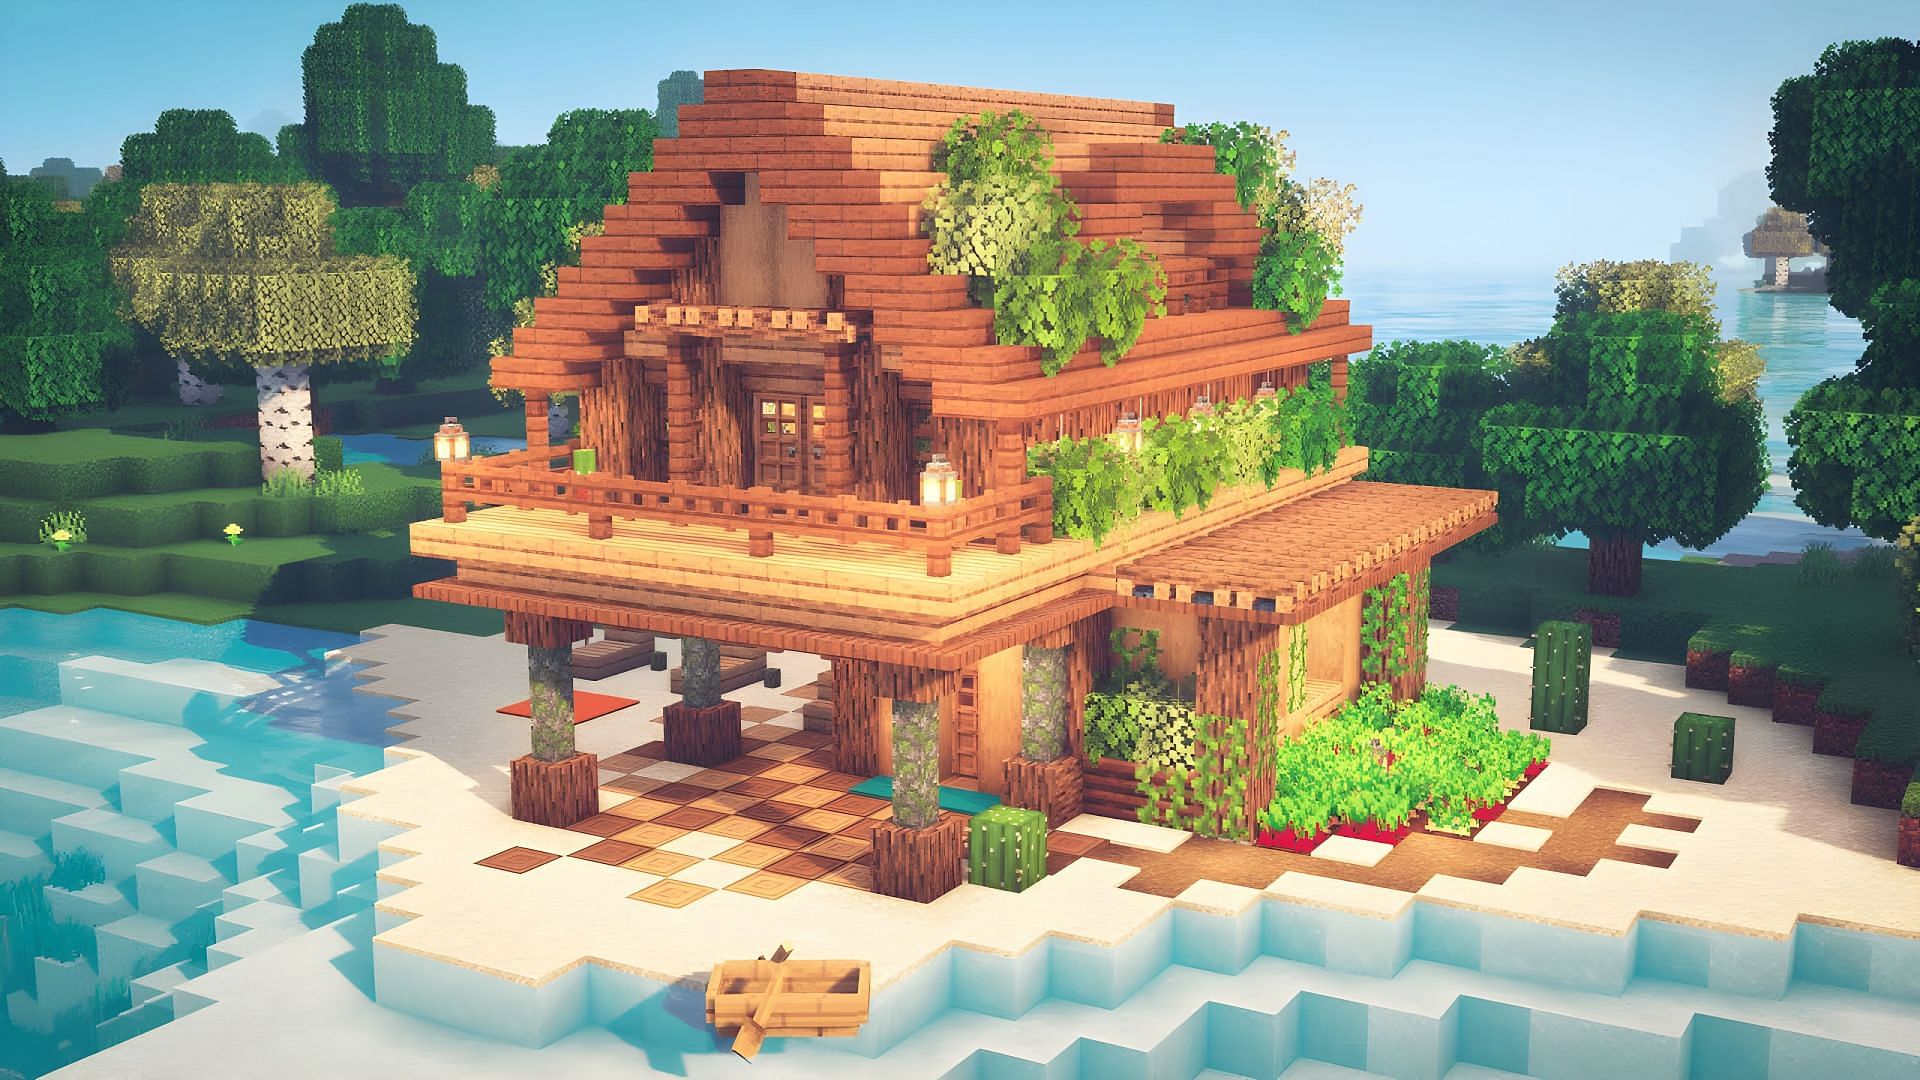 Minecraft beach houses are truly spectacular (Image via Youtube/Zaypixel)